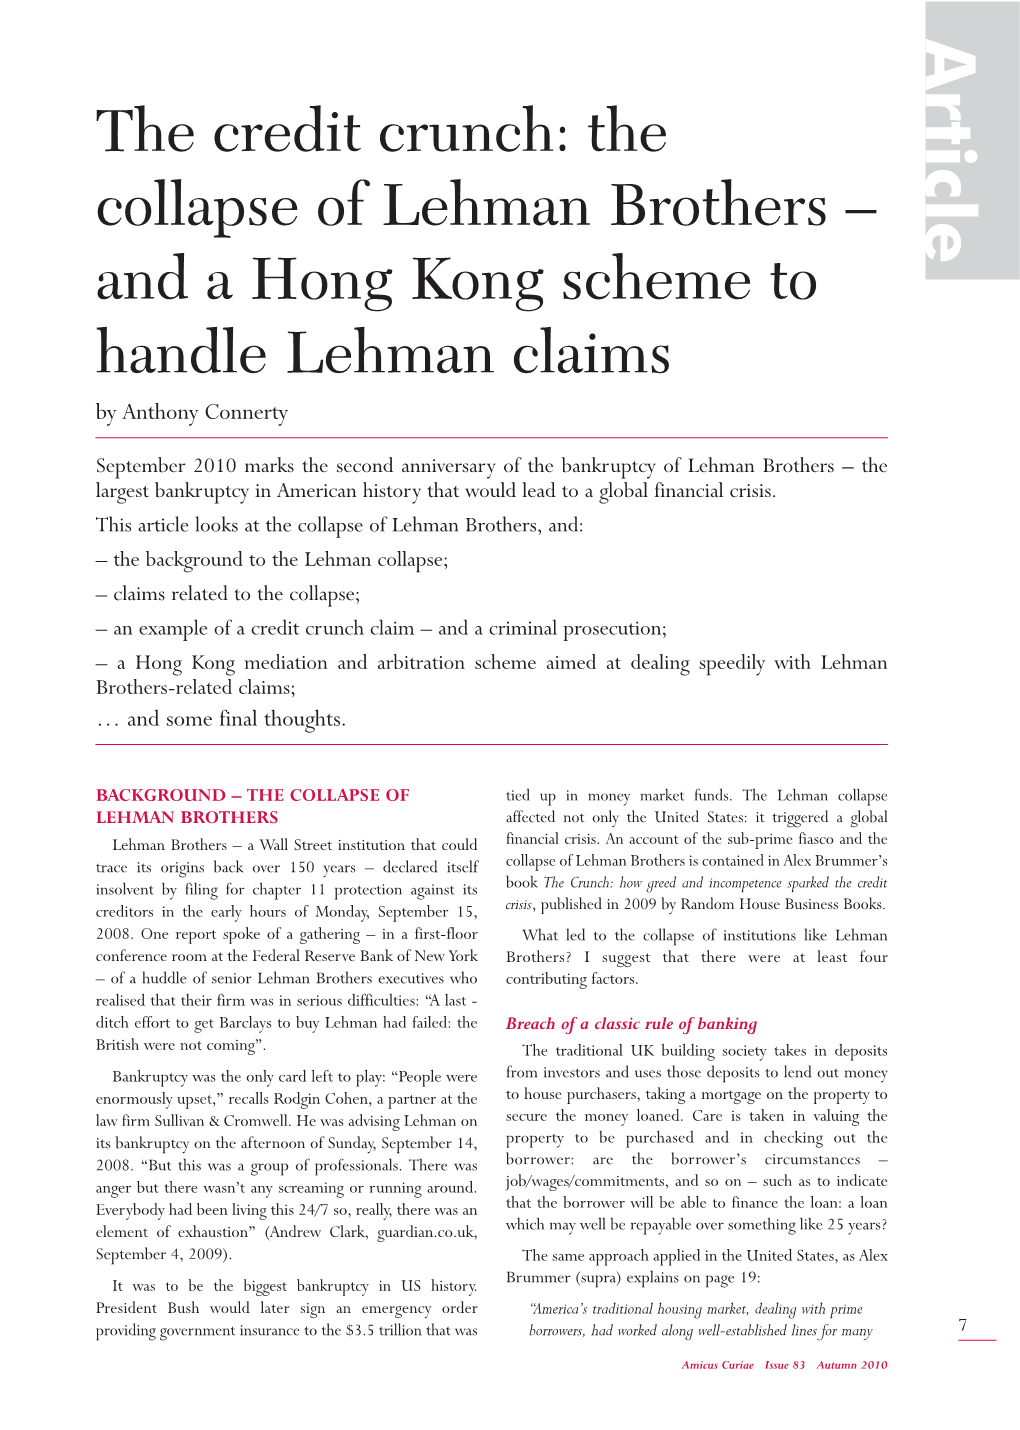 The Collapse of Lehman Brothers – and a Hong Kong Scheme to Handle Lehman Claims by Anthony Connerty